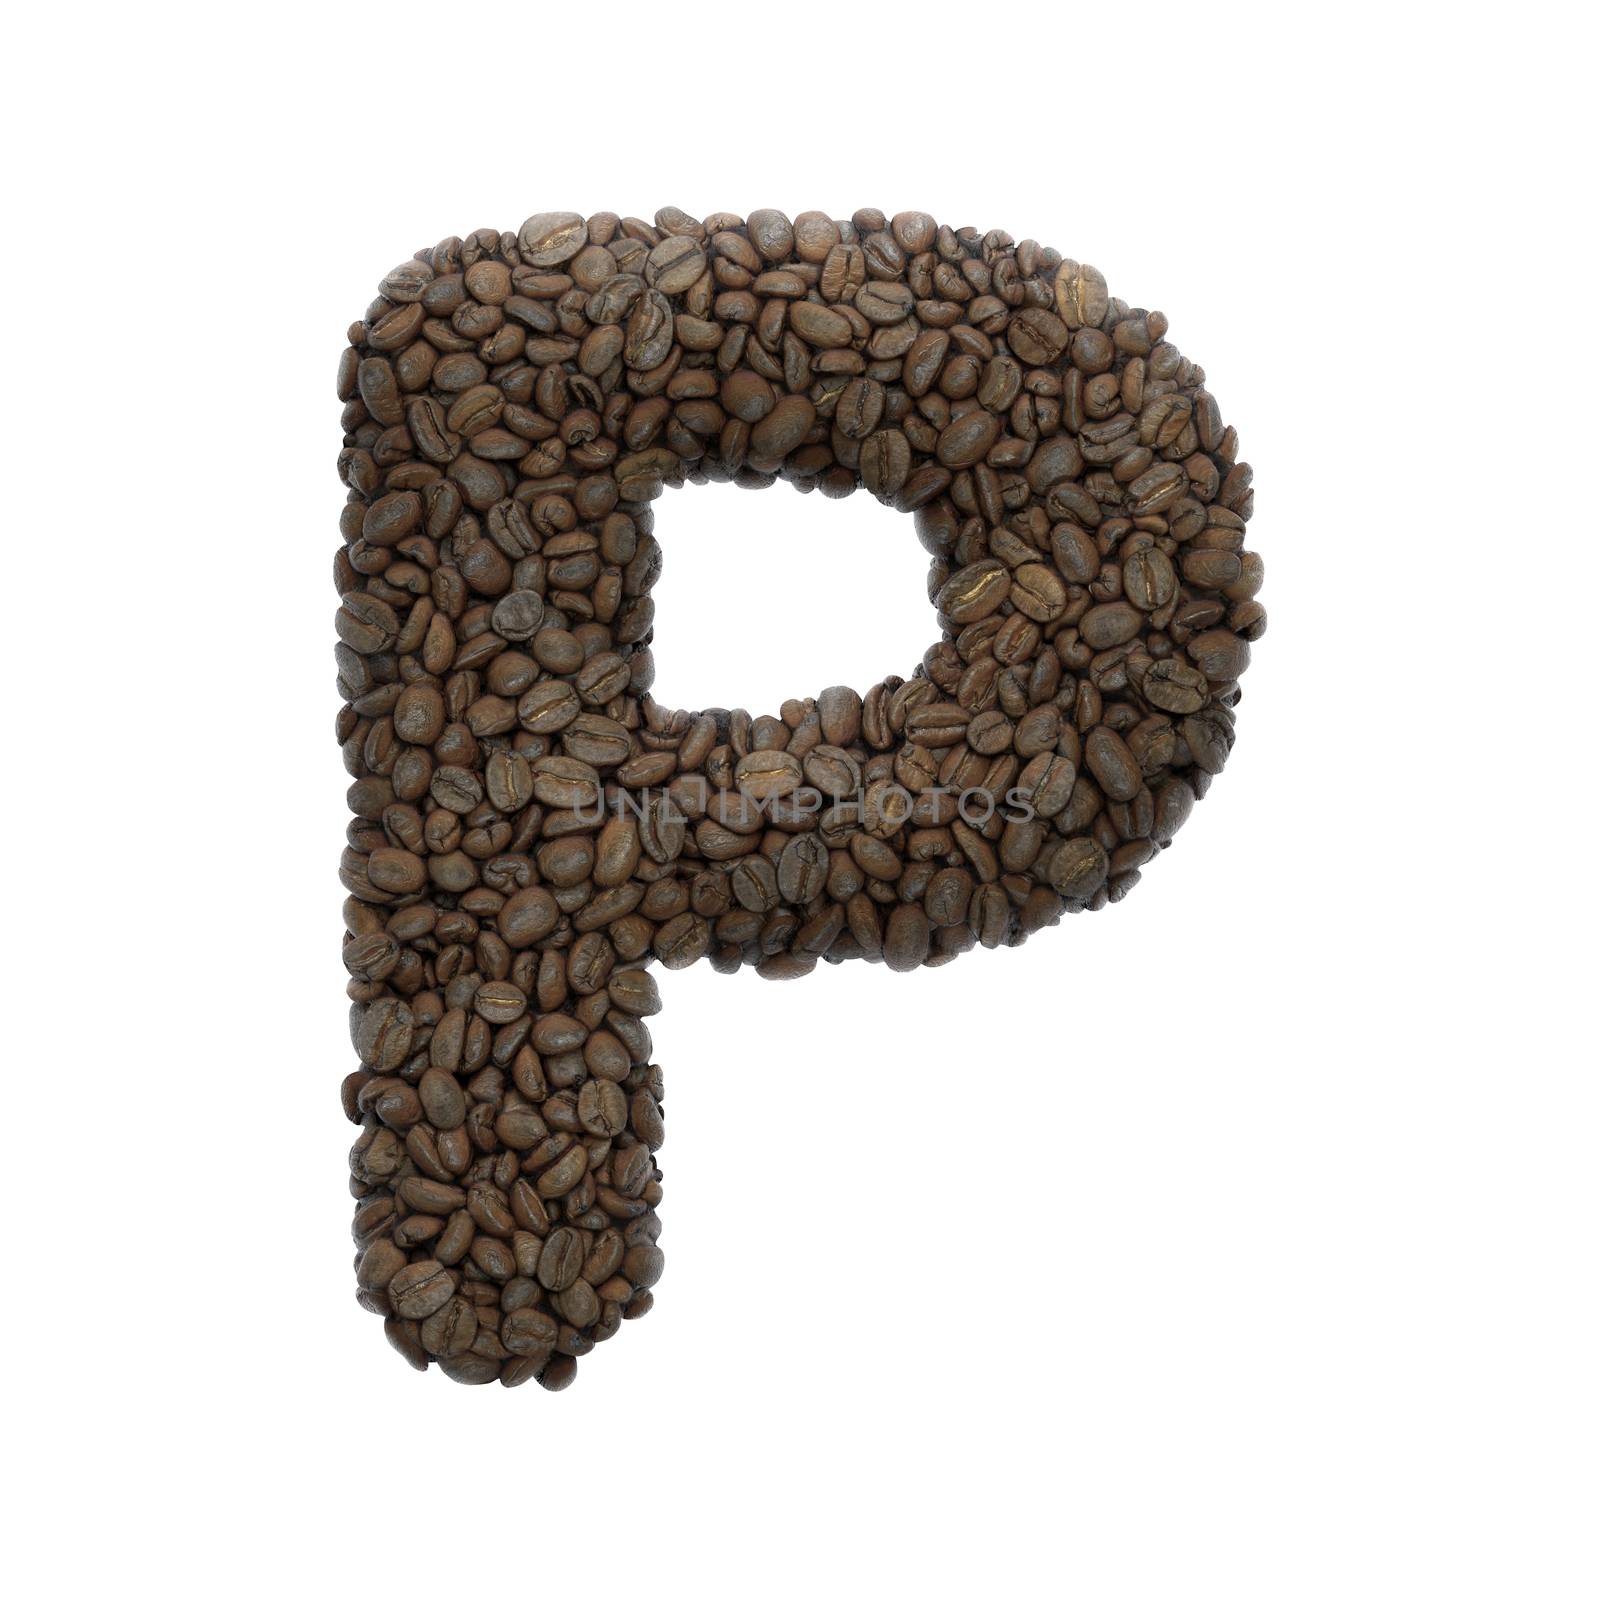 Coffee letter P - Capital 3d roasted beans font isolated on white background. This alphabet is perfect for creative illustrations related but not limited to Coffee, energy, insomnia...